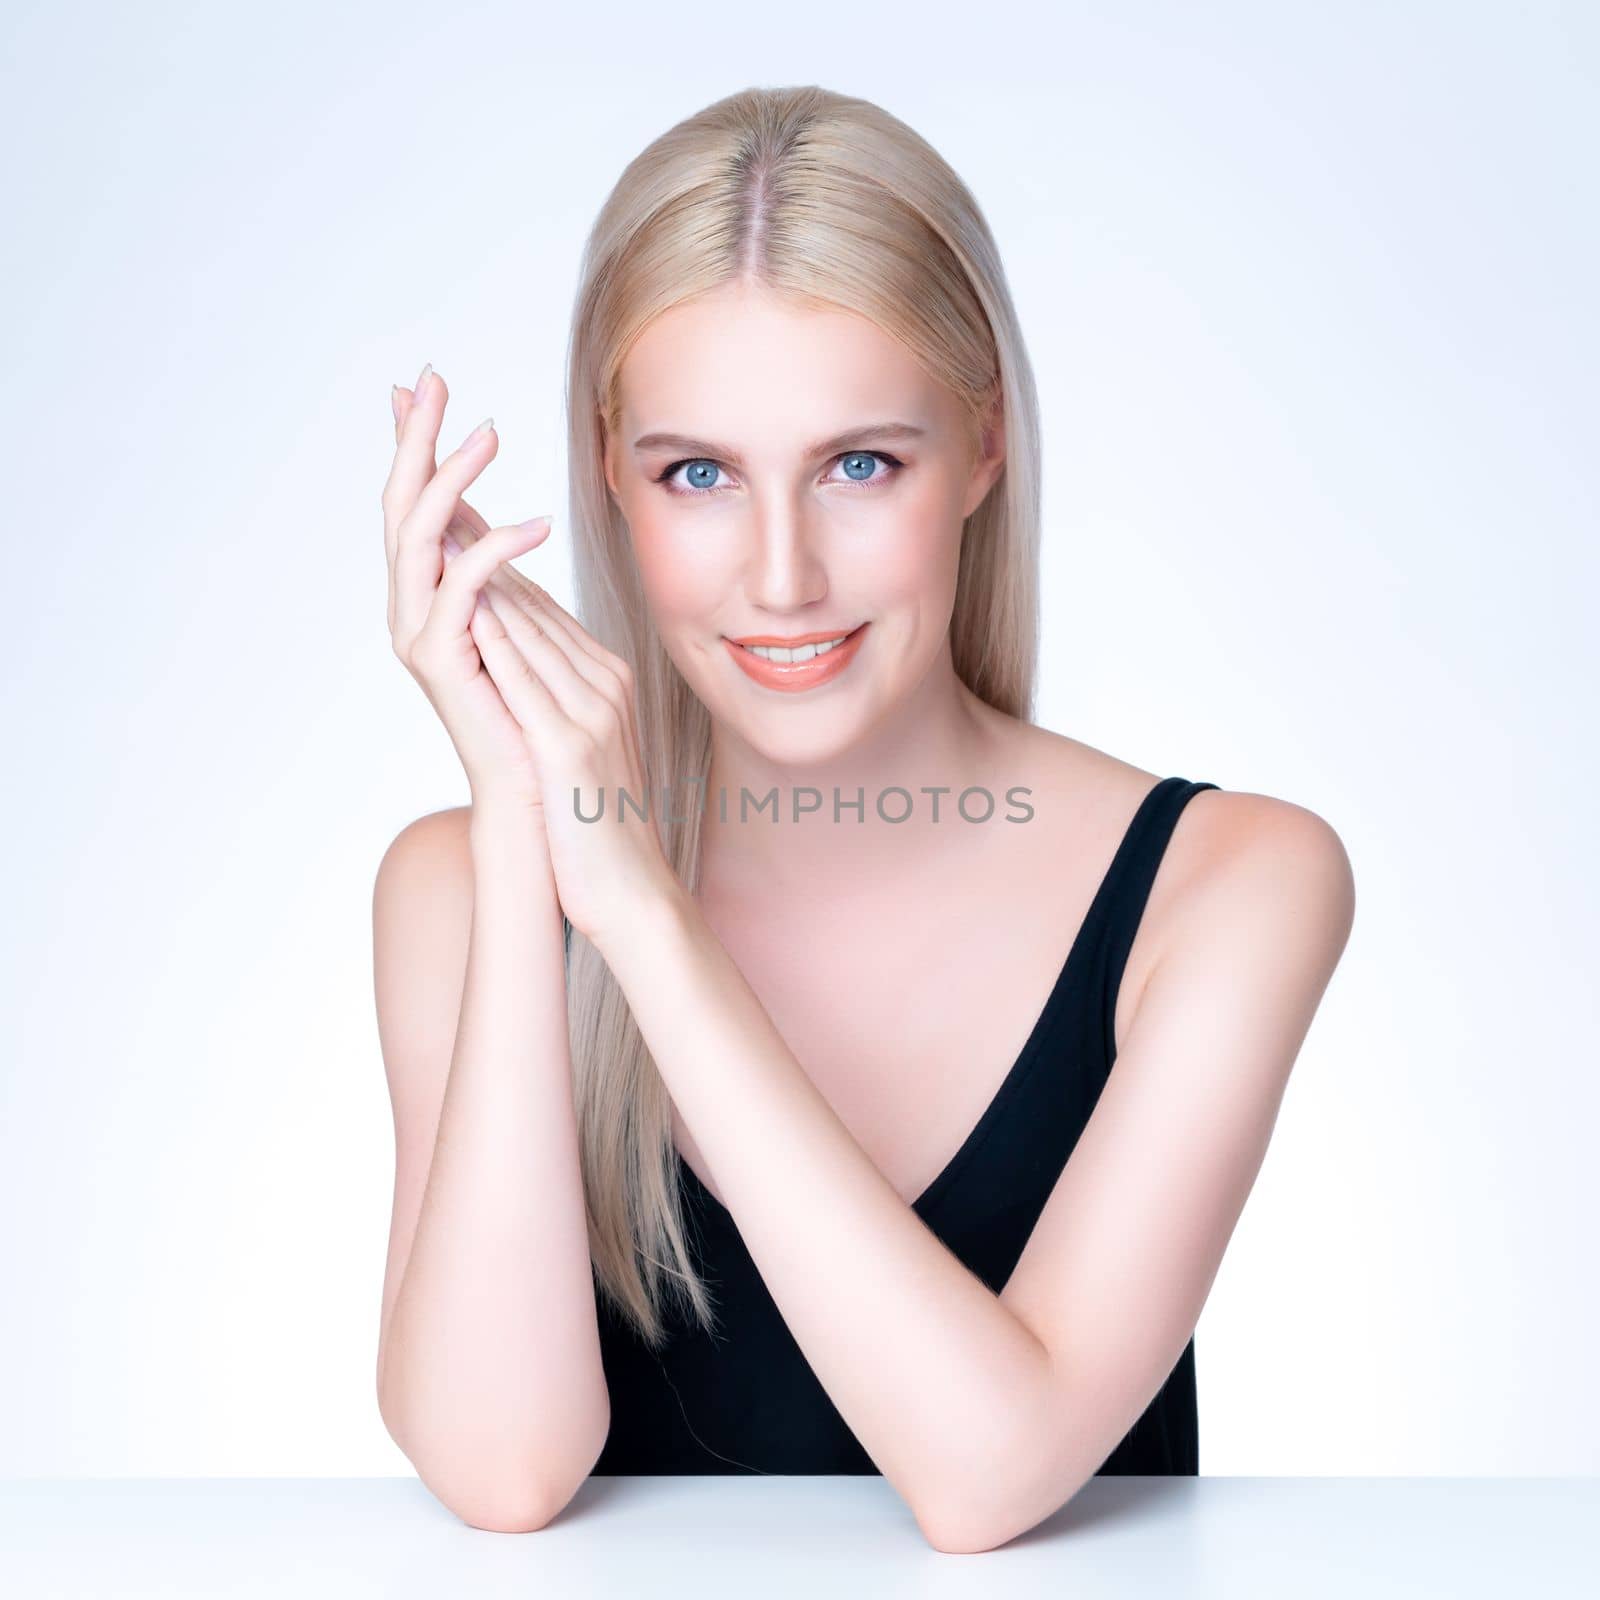 Personable beautiful woman with alluring perfect smooth and clean skin portrait. by biancoblue